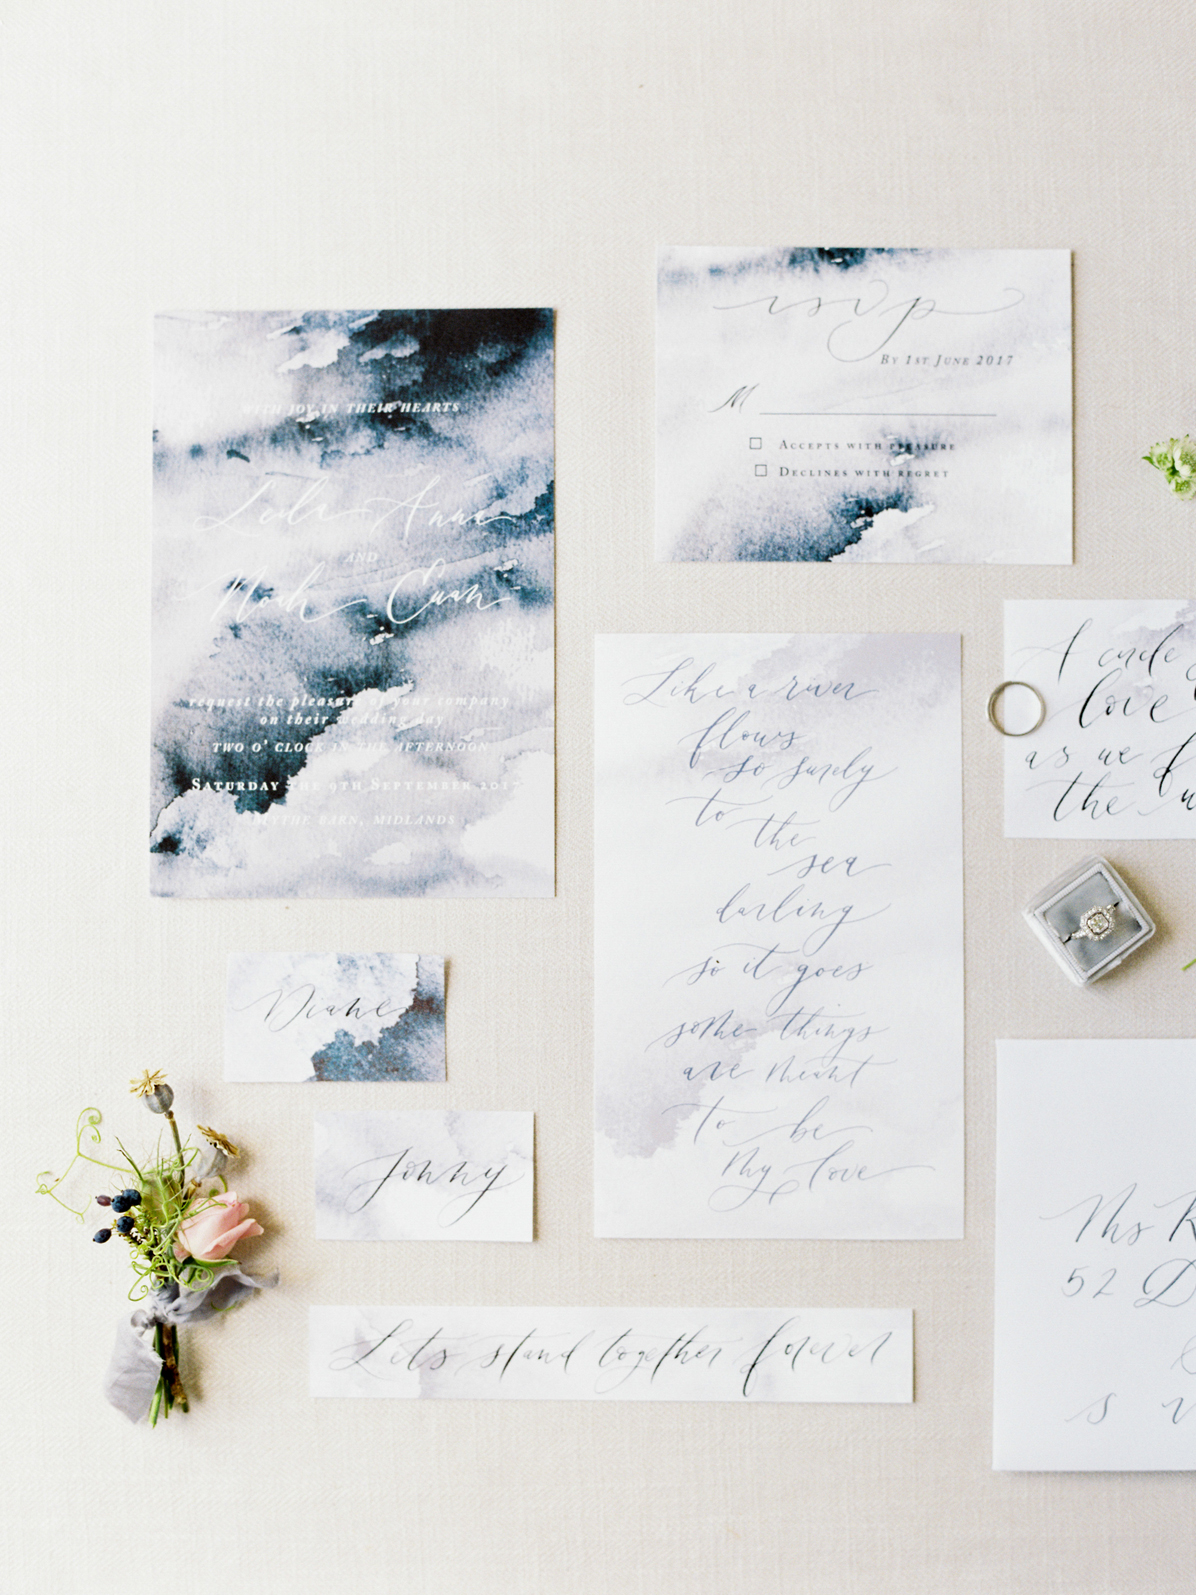 Stationery & Calligraphy by Laura E Patrick